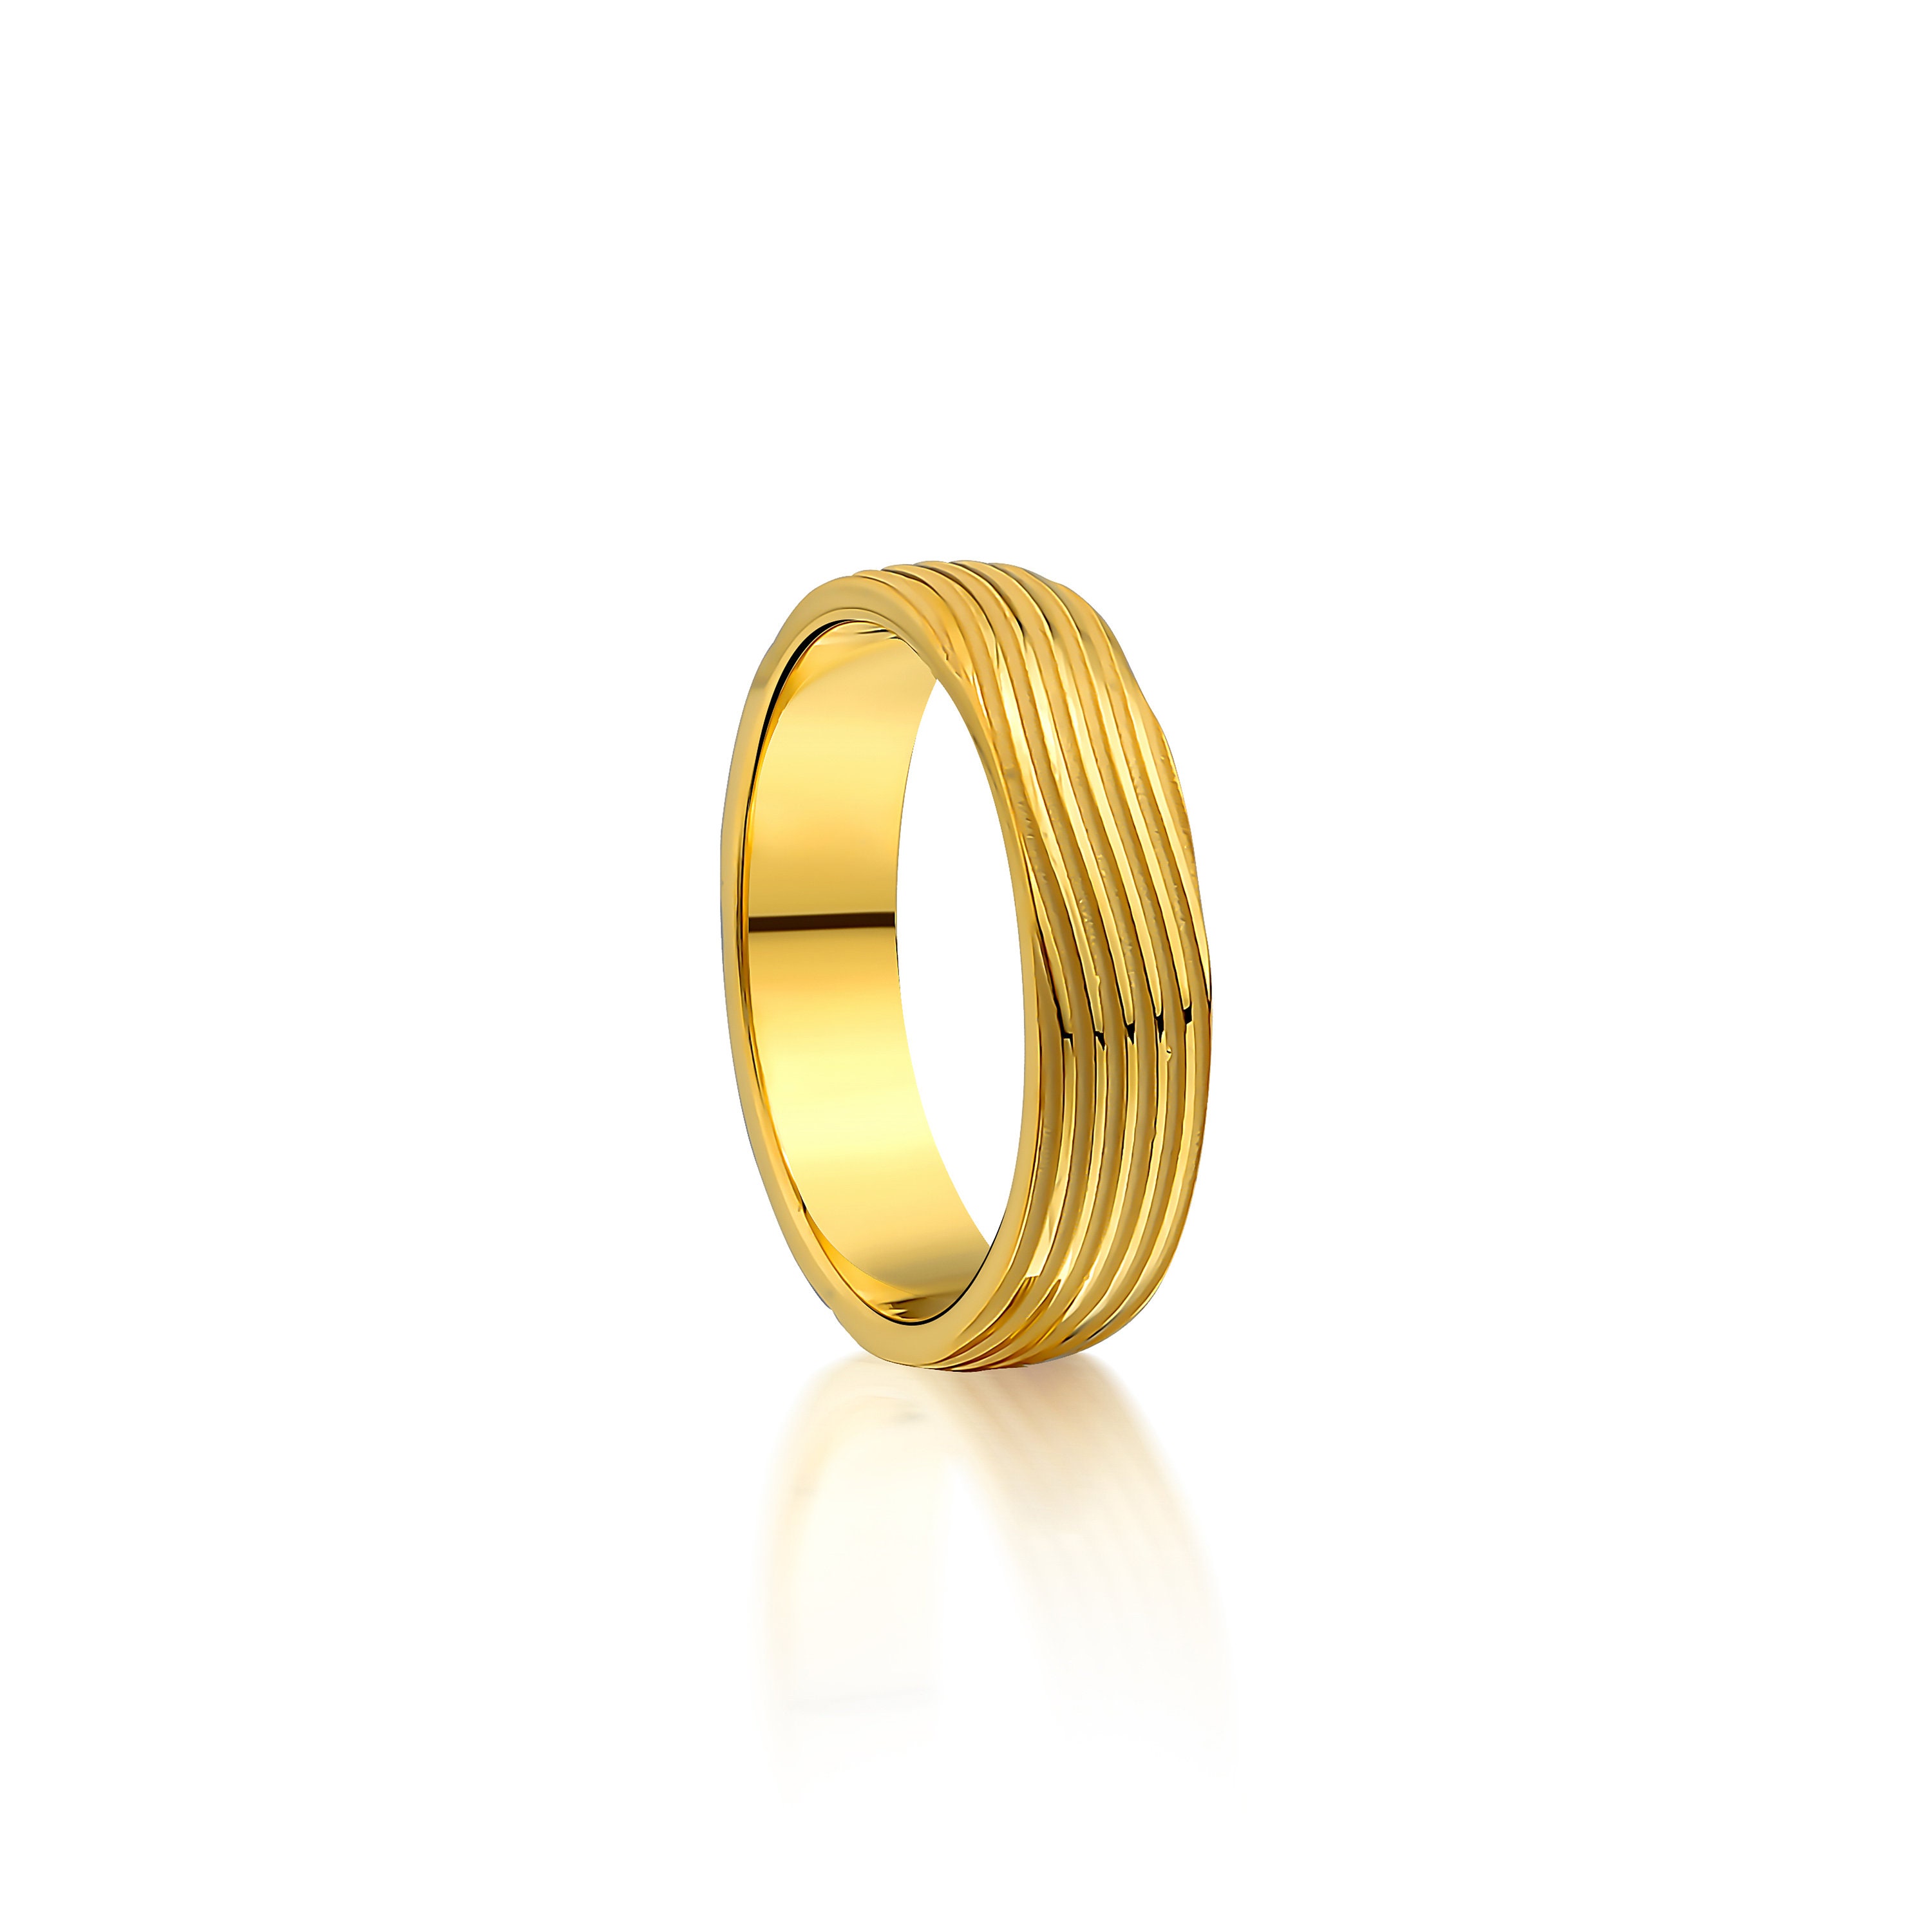 CEYLONMINE-challa Ring Natural Gold Plated challa Ring for Unisex :  Amazon.in: Fashion